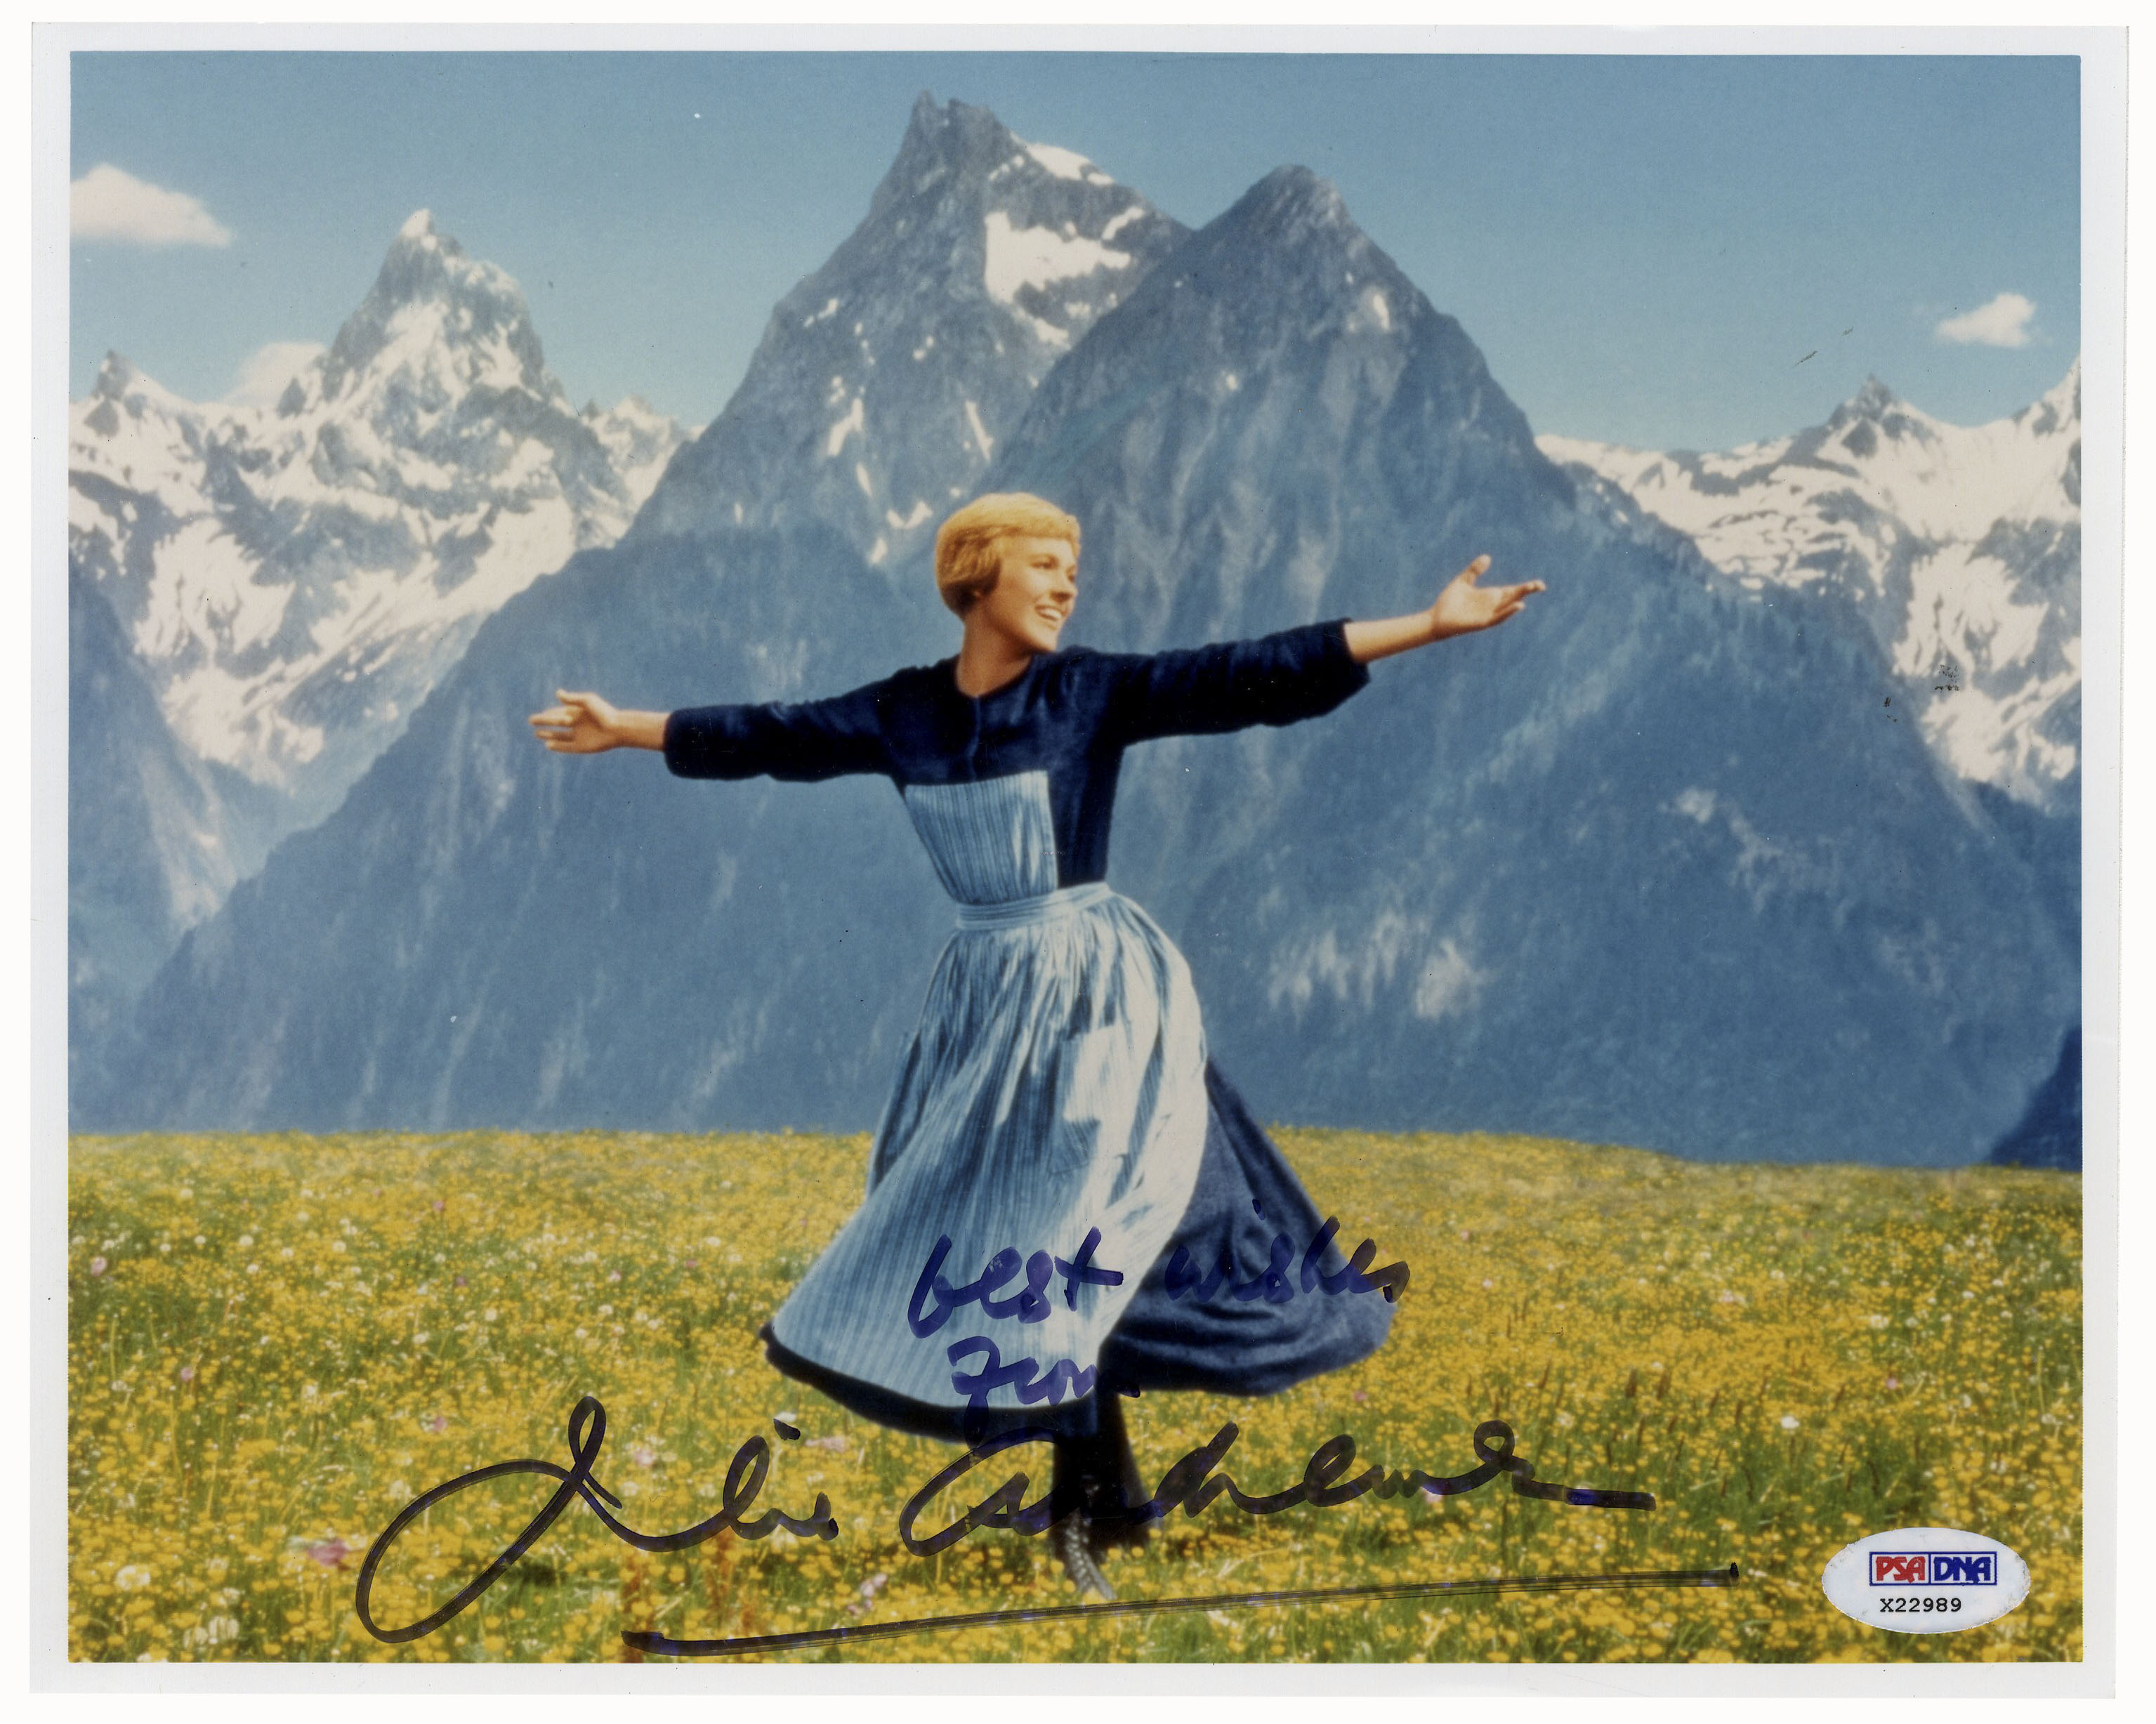 JULIE ANDREWS SIGNED PHOTO PRINT AUTOGRAPH THE SOUND OF MUSIC 